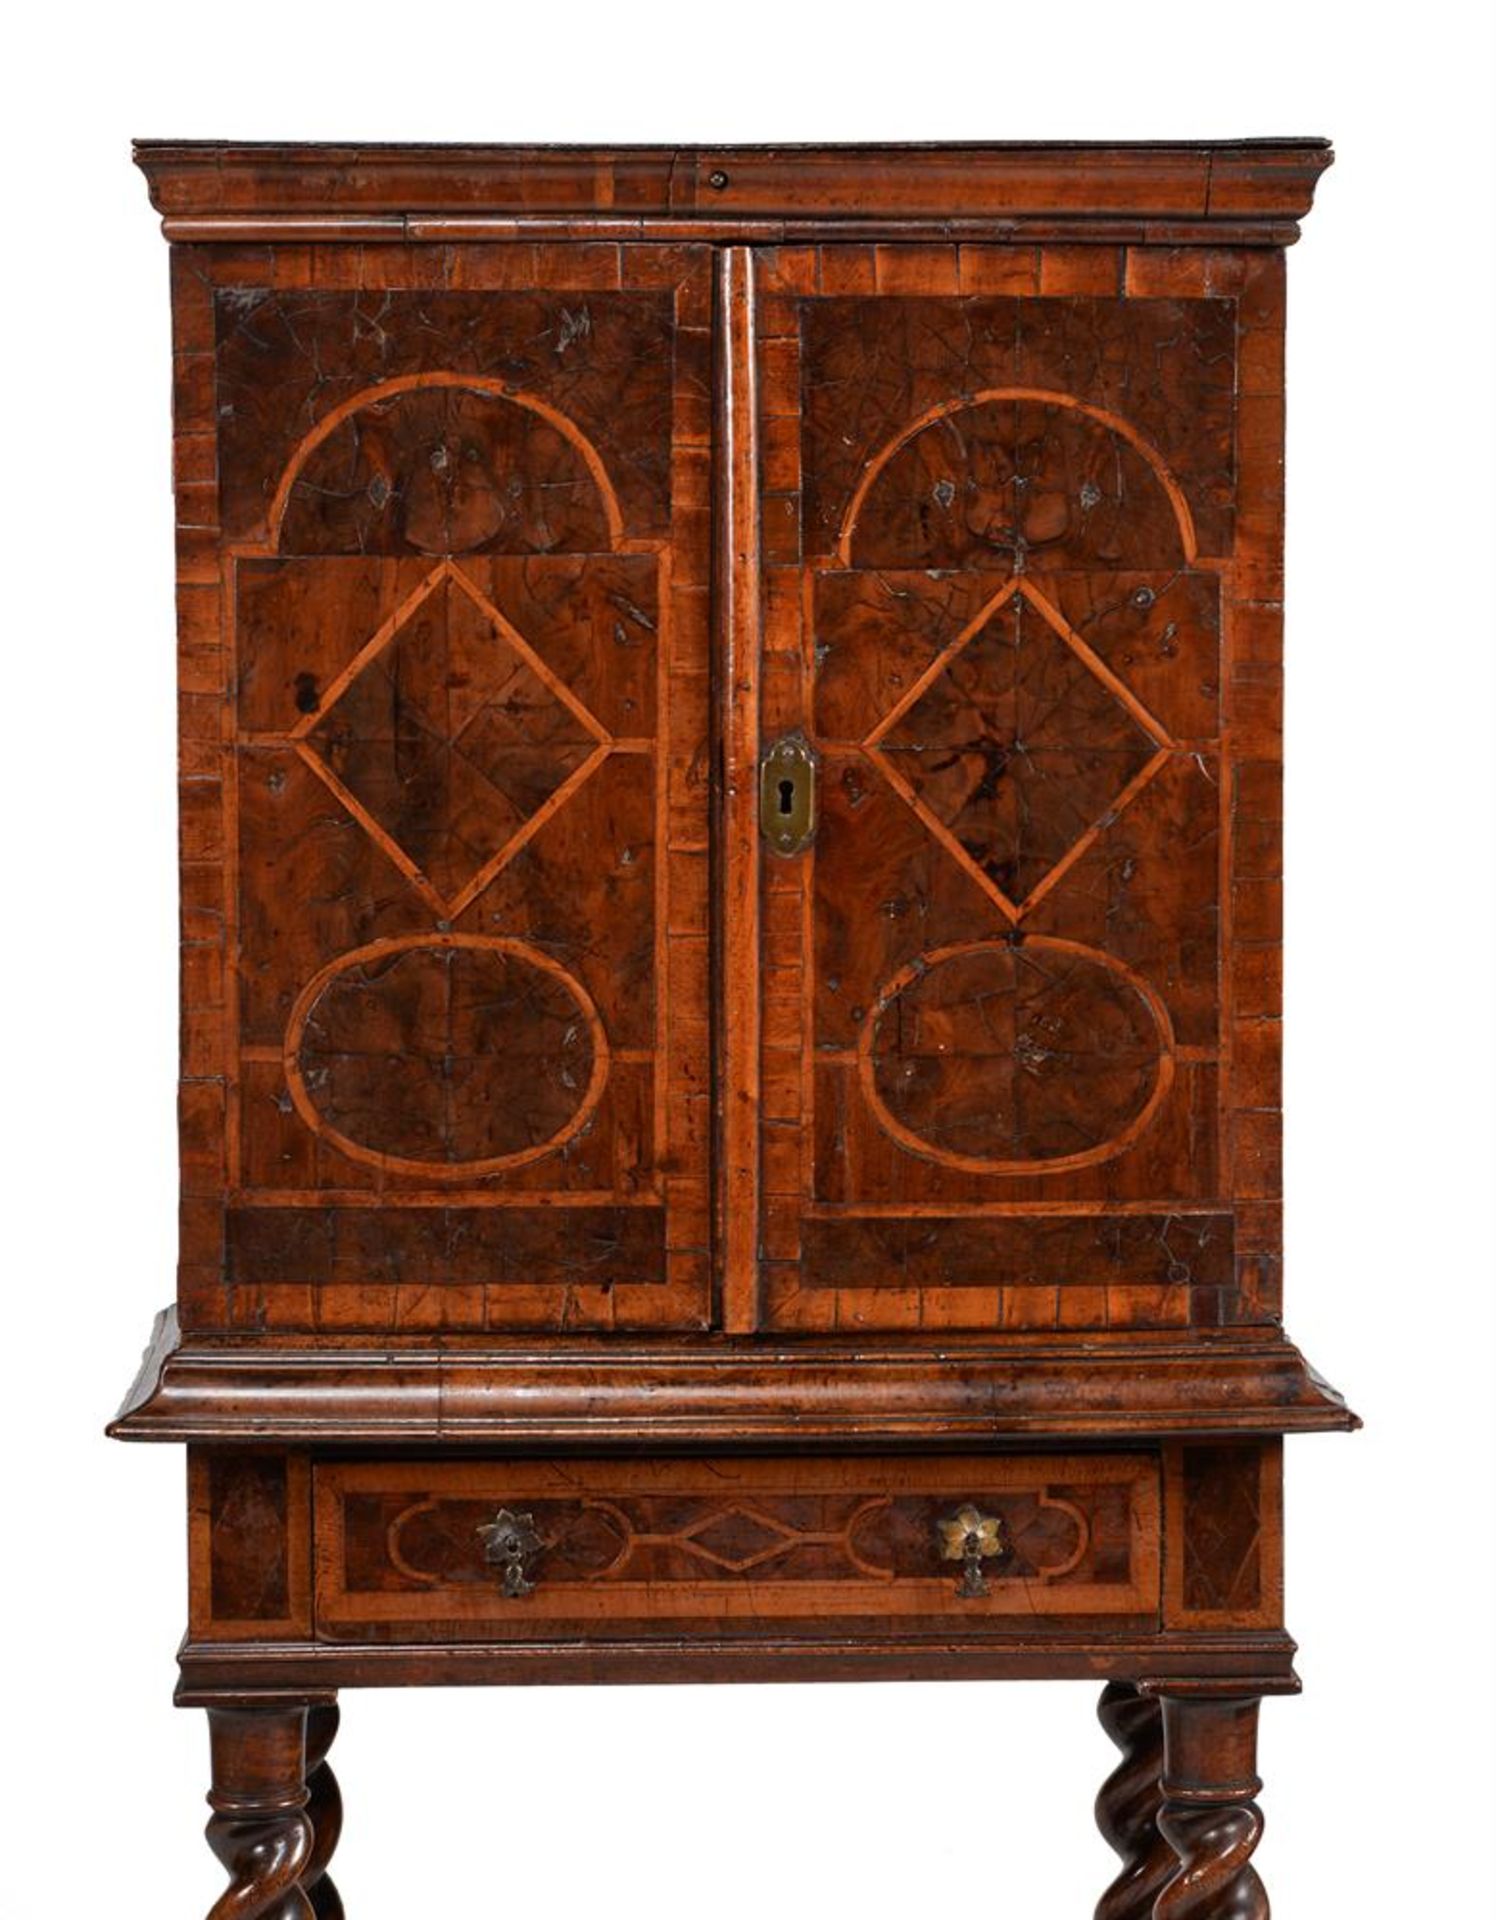 A CHARLES II YEW OYSTER VENEERED AND HOLLY BANDED CABINET - Image 5 of 9